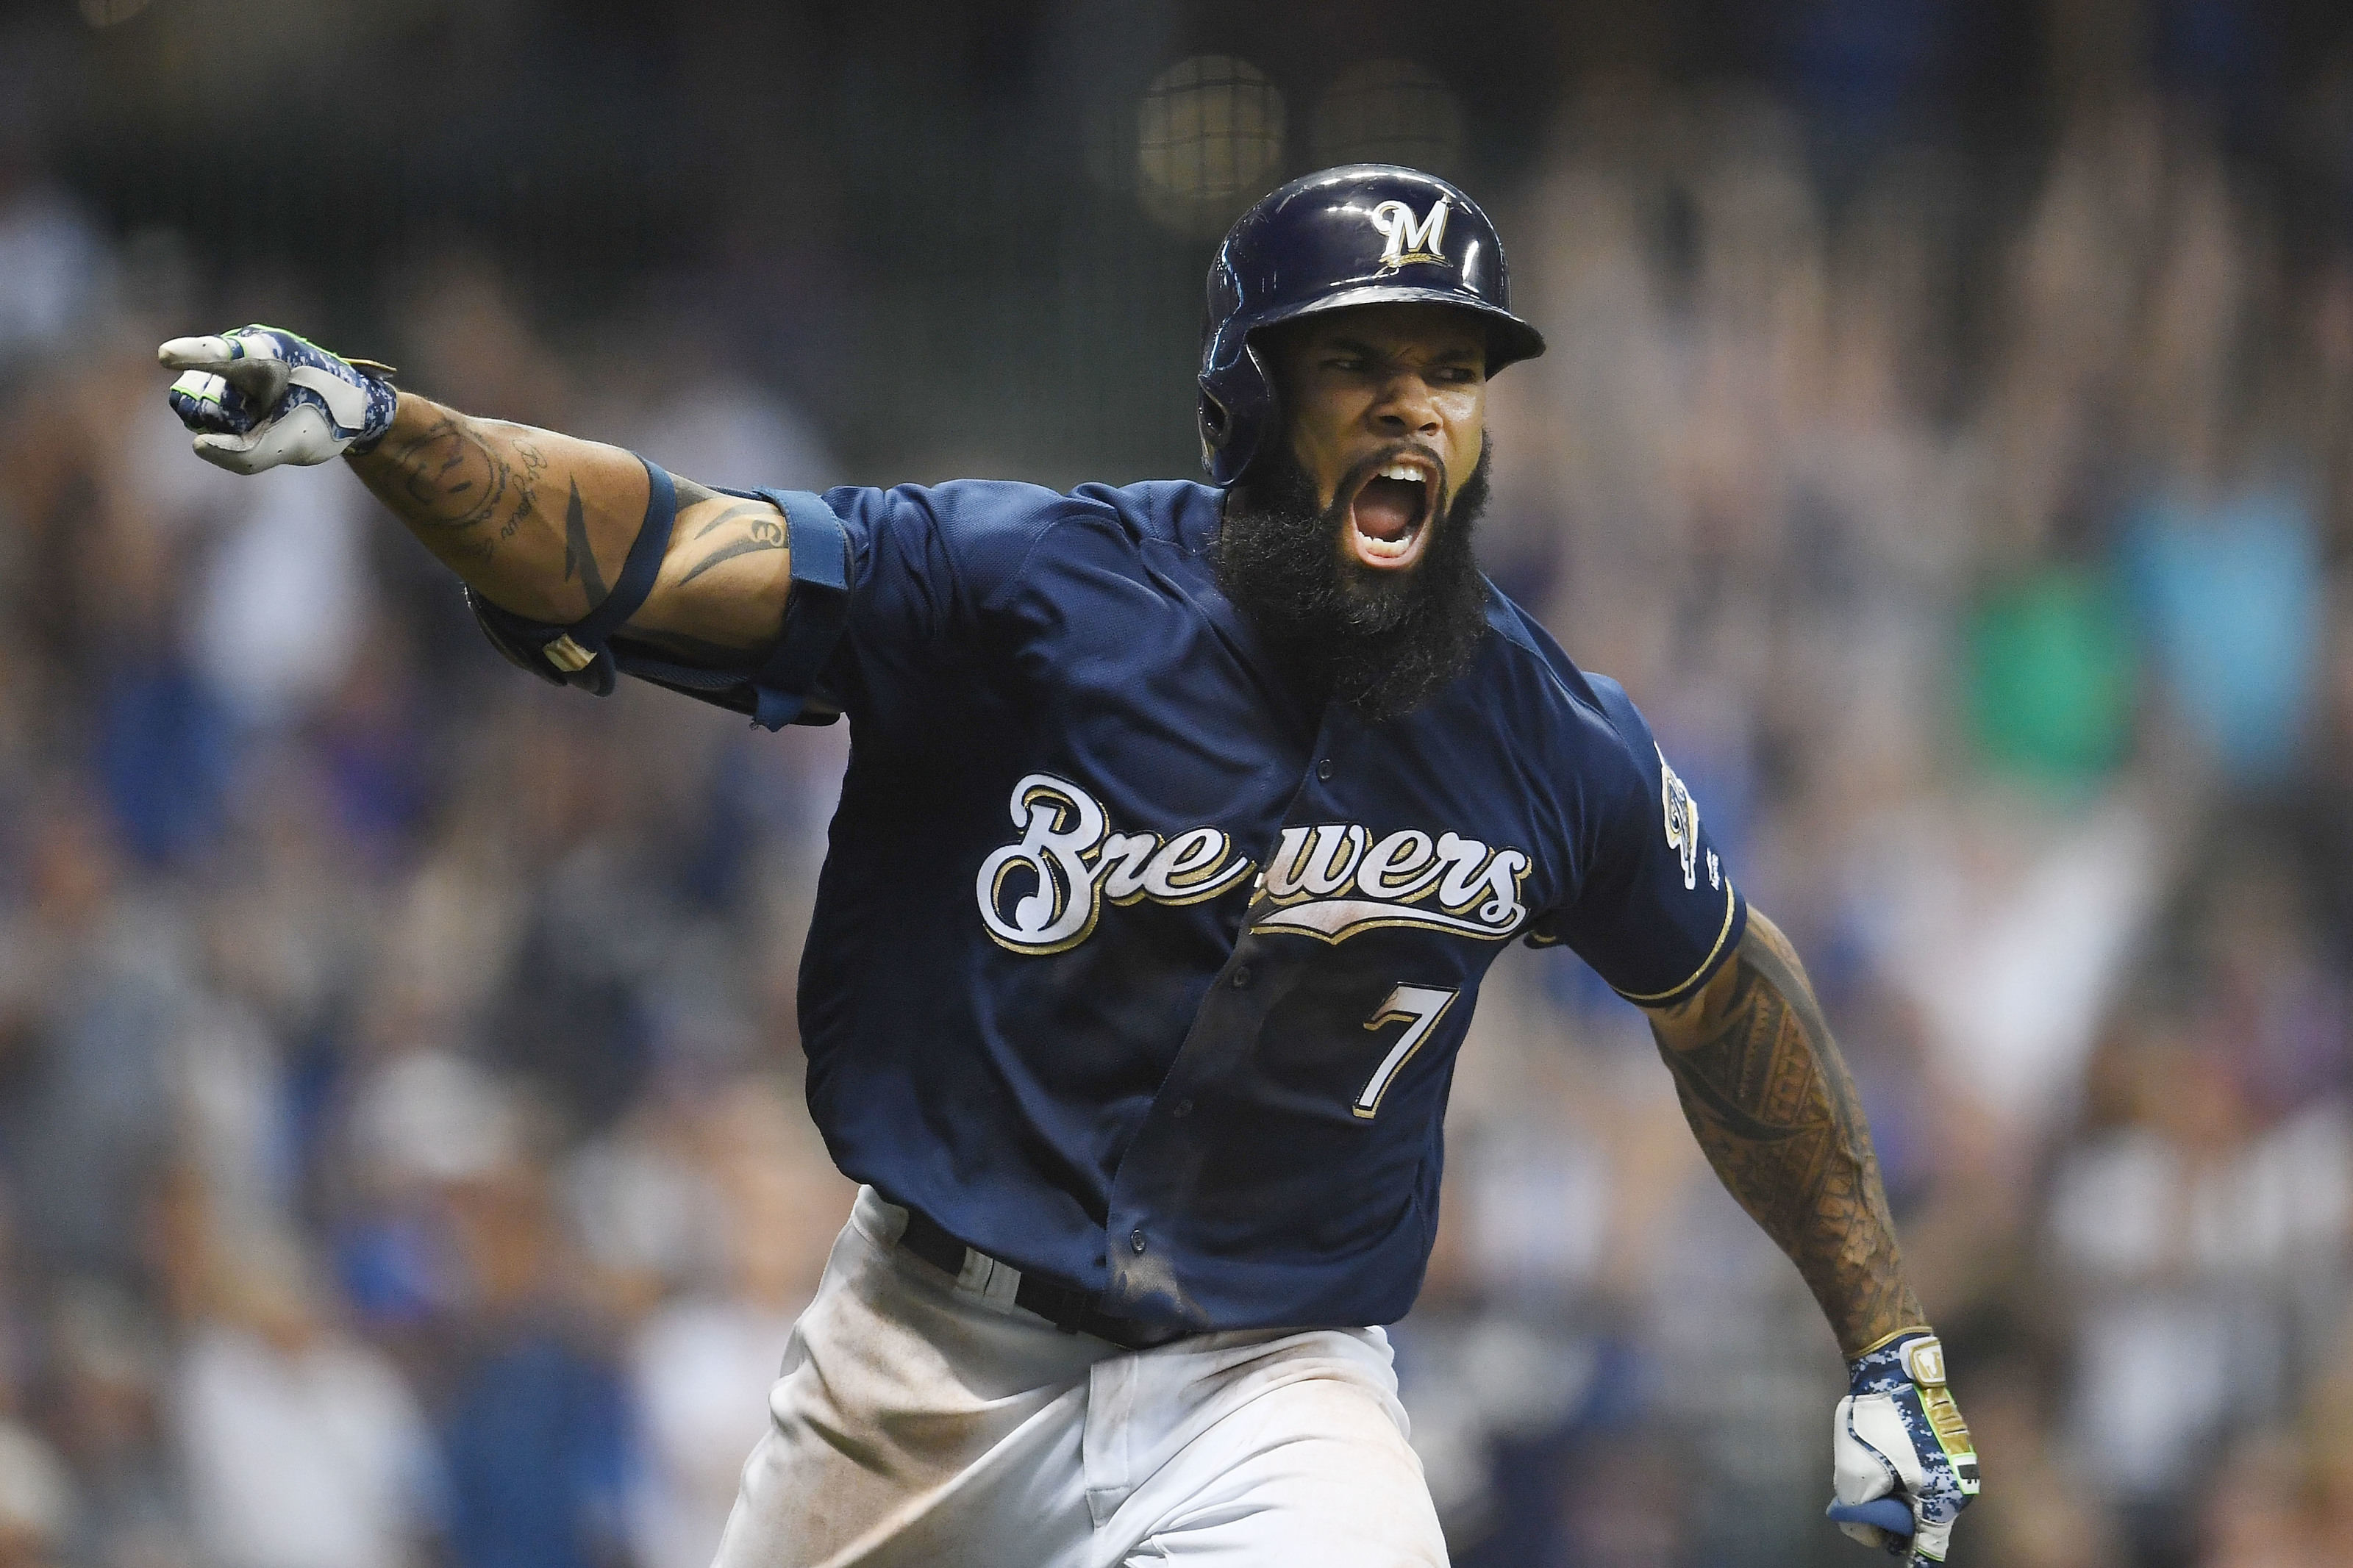 Milwaukee Brewers: Eric Thames' has provided a big boost on offense